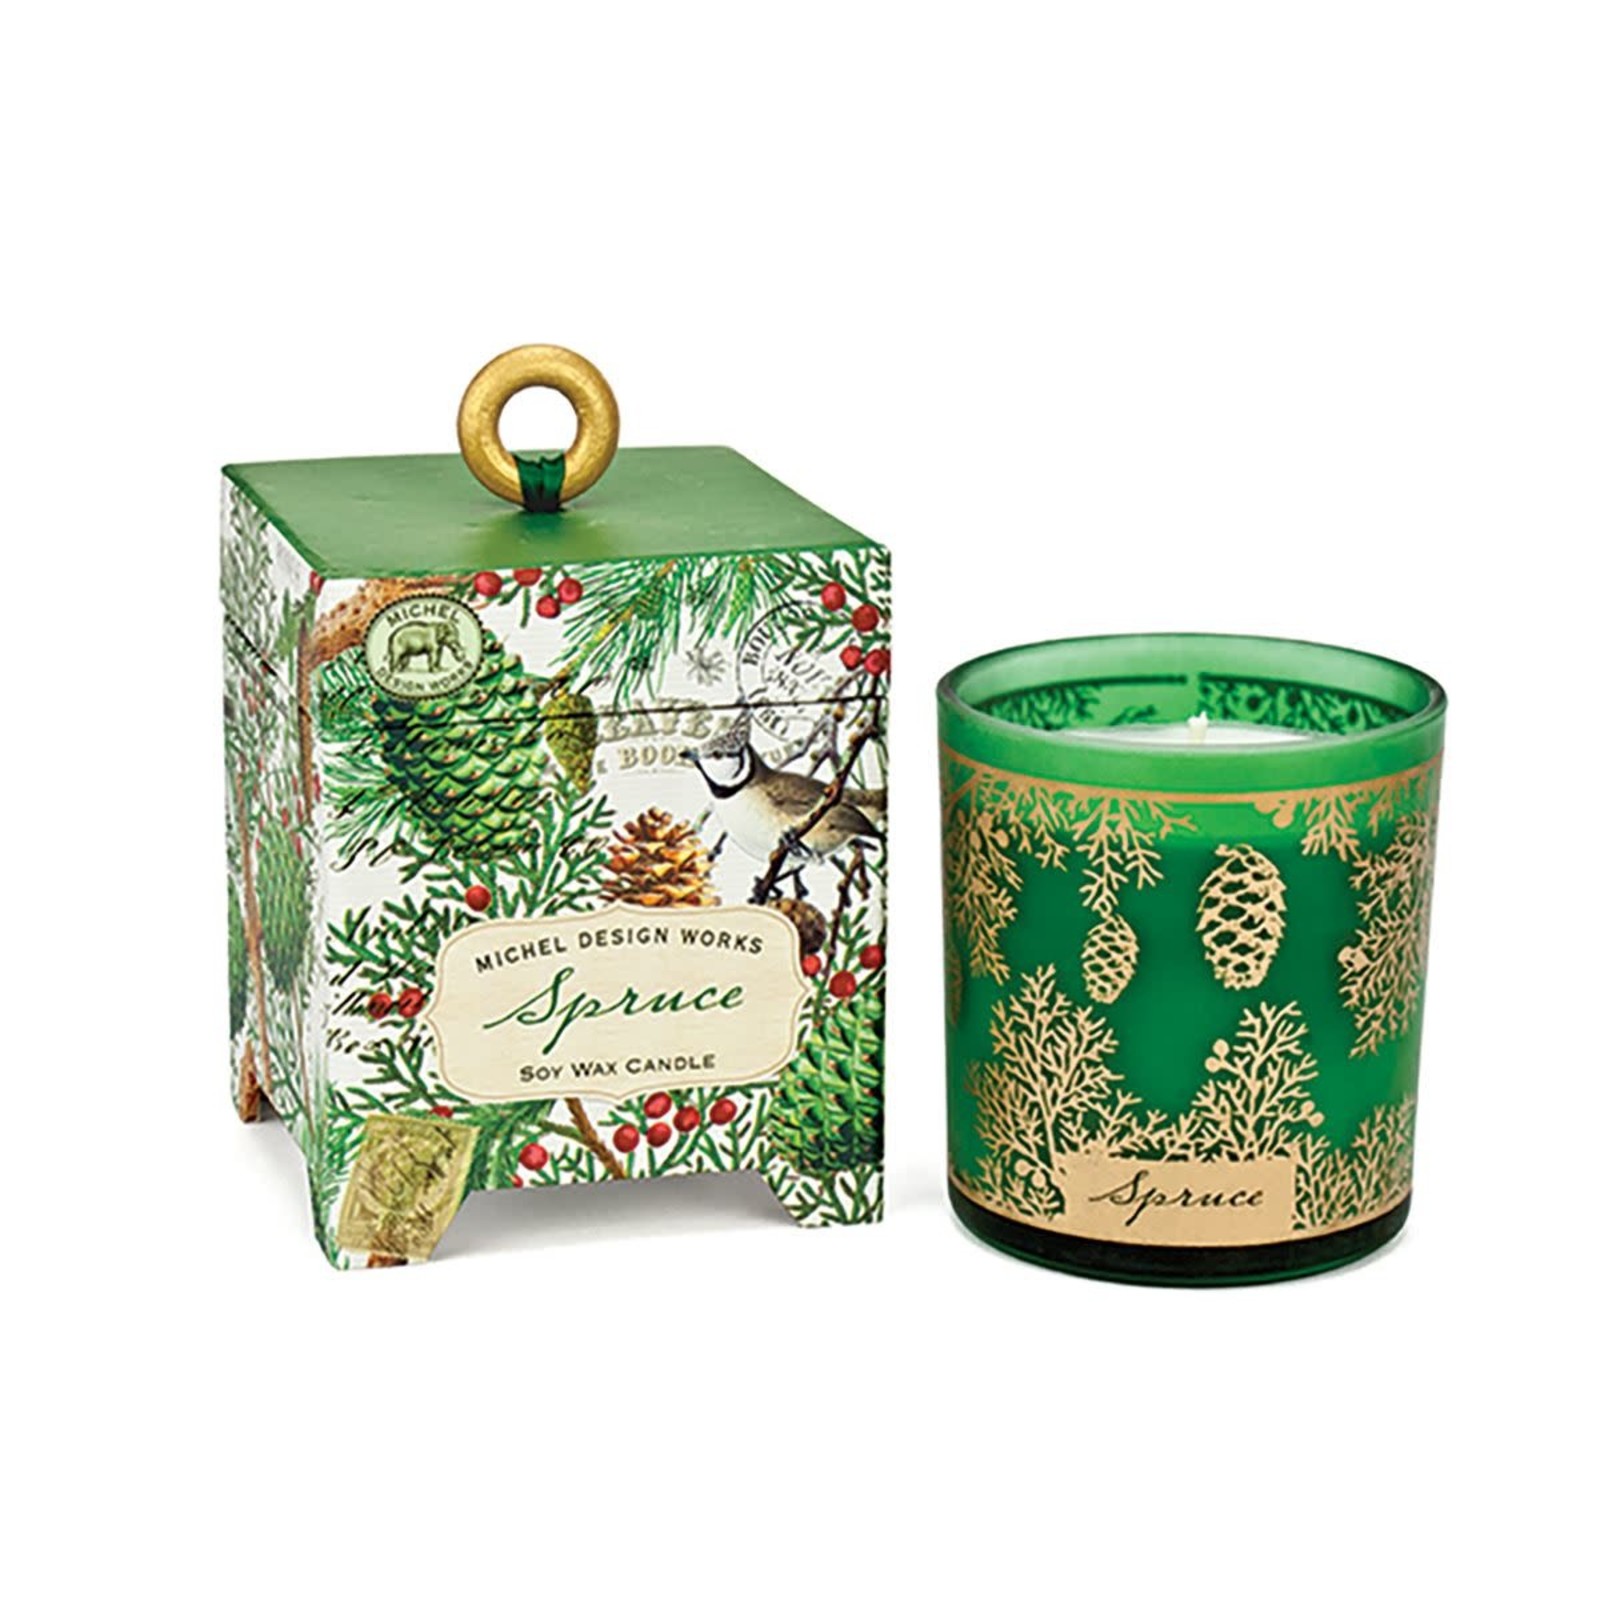 Michel Design Works Spruce 6.5 oz. Soy Wax Candle  CAN257 loading=